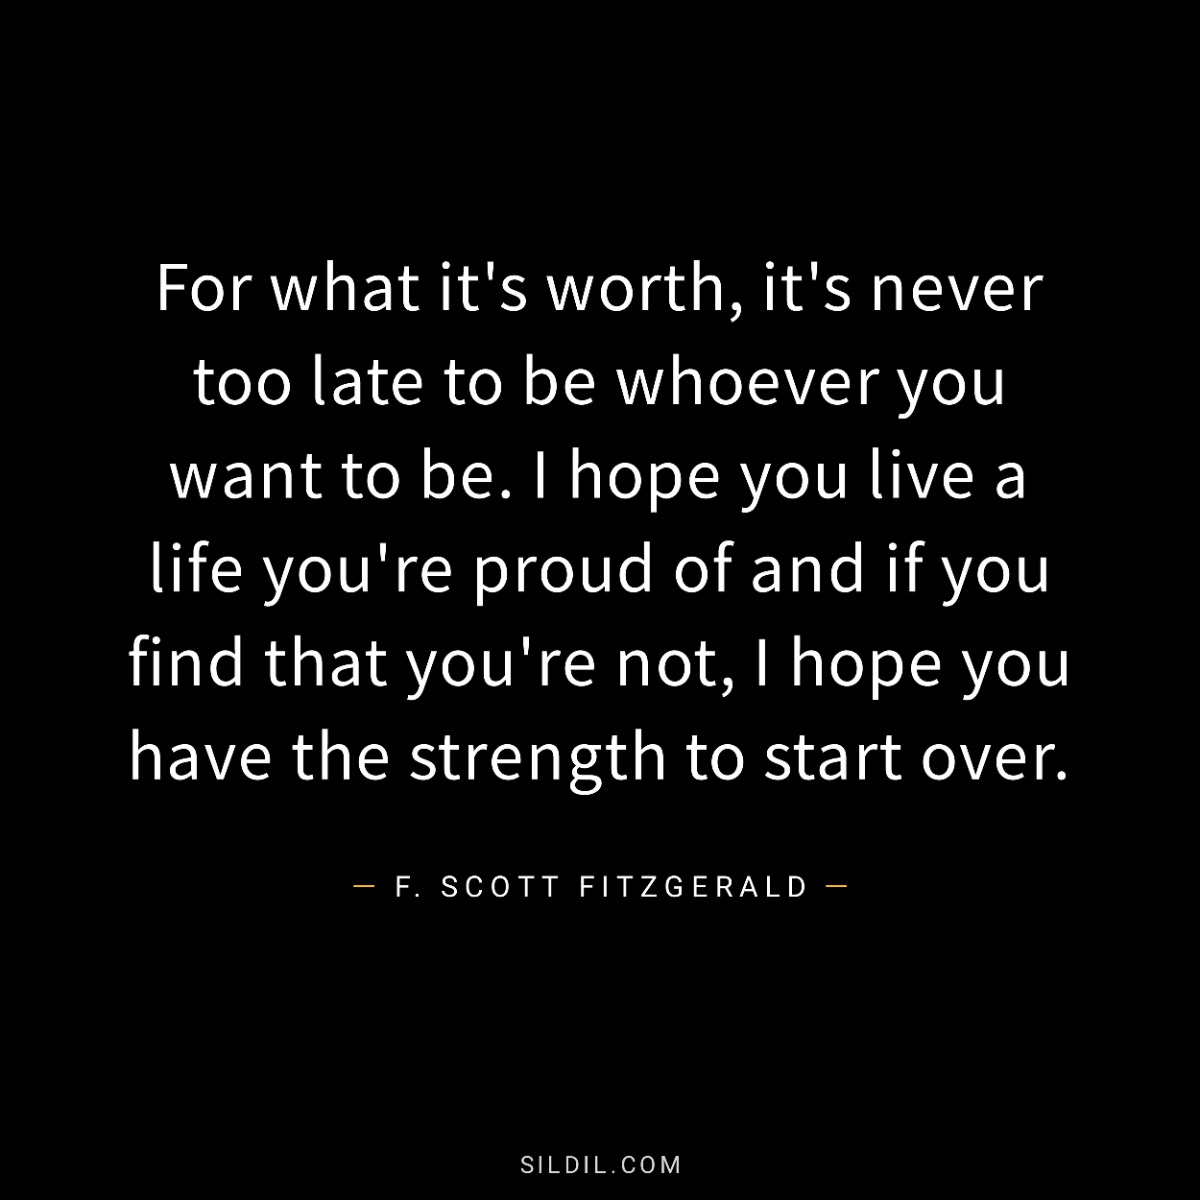 For what it's worth, it's never too late to be whoever you want to be. I hope you live a life you're proud of and if you find that you're not, I hope you have the strength to start over.